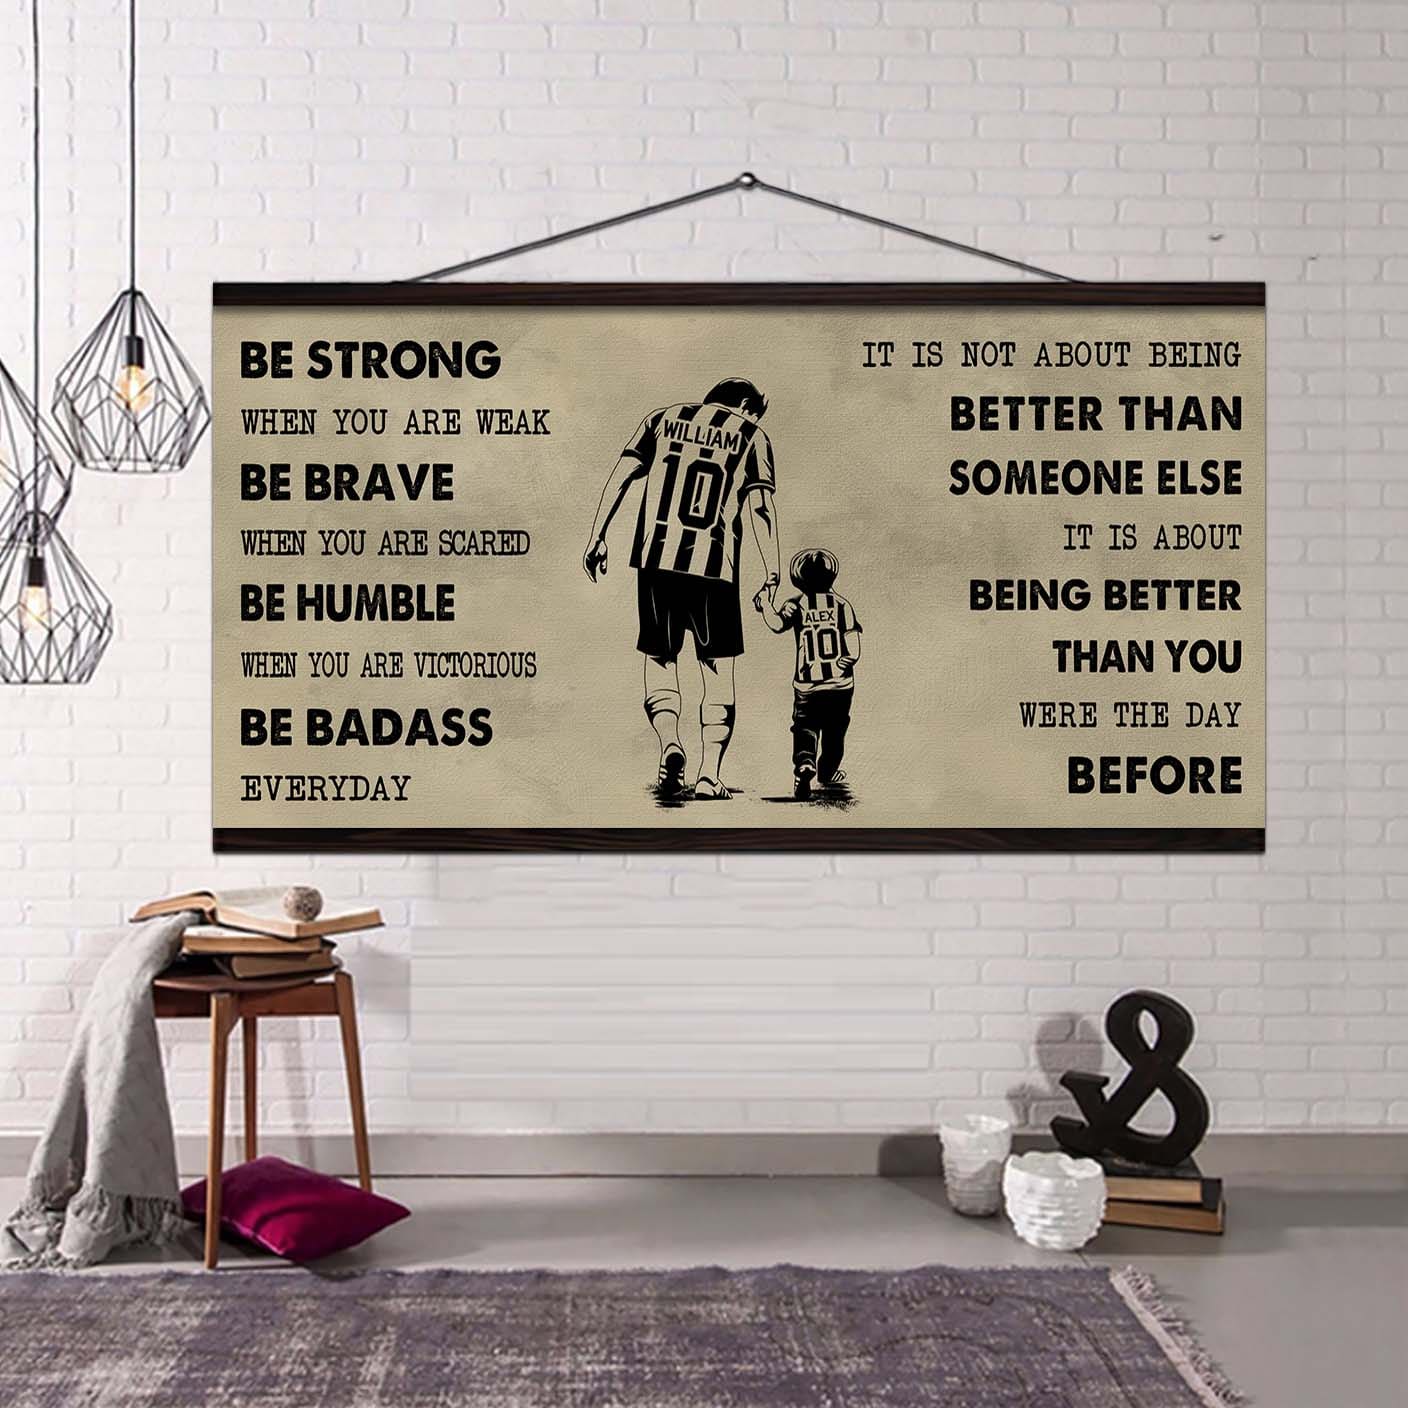 Soccer Poster Canvas From Dad To Son Be Strong When You Are Weak - It Is Not About Being Better Than Someone Else